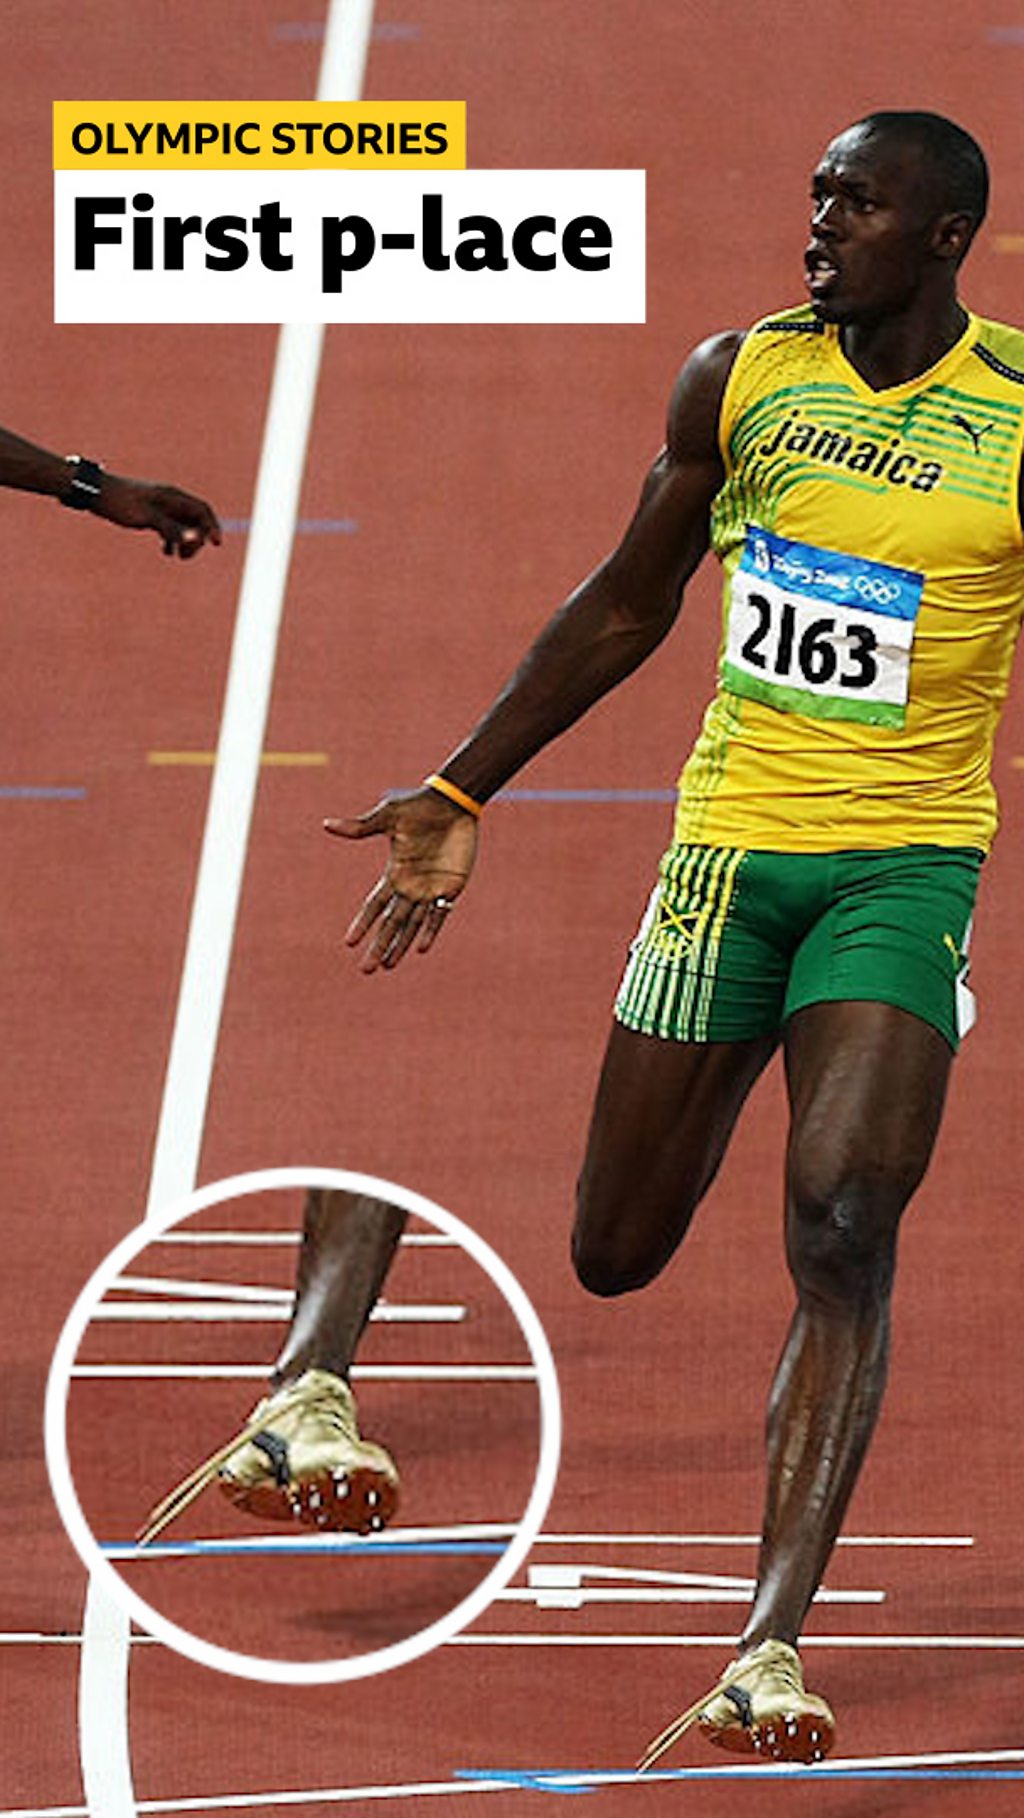 Usain Bolt winning 100m race with untied shoe lace